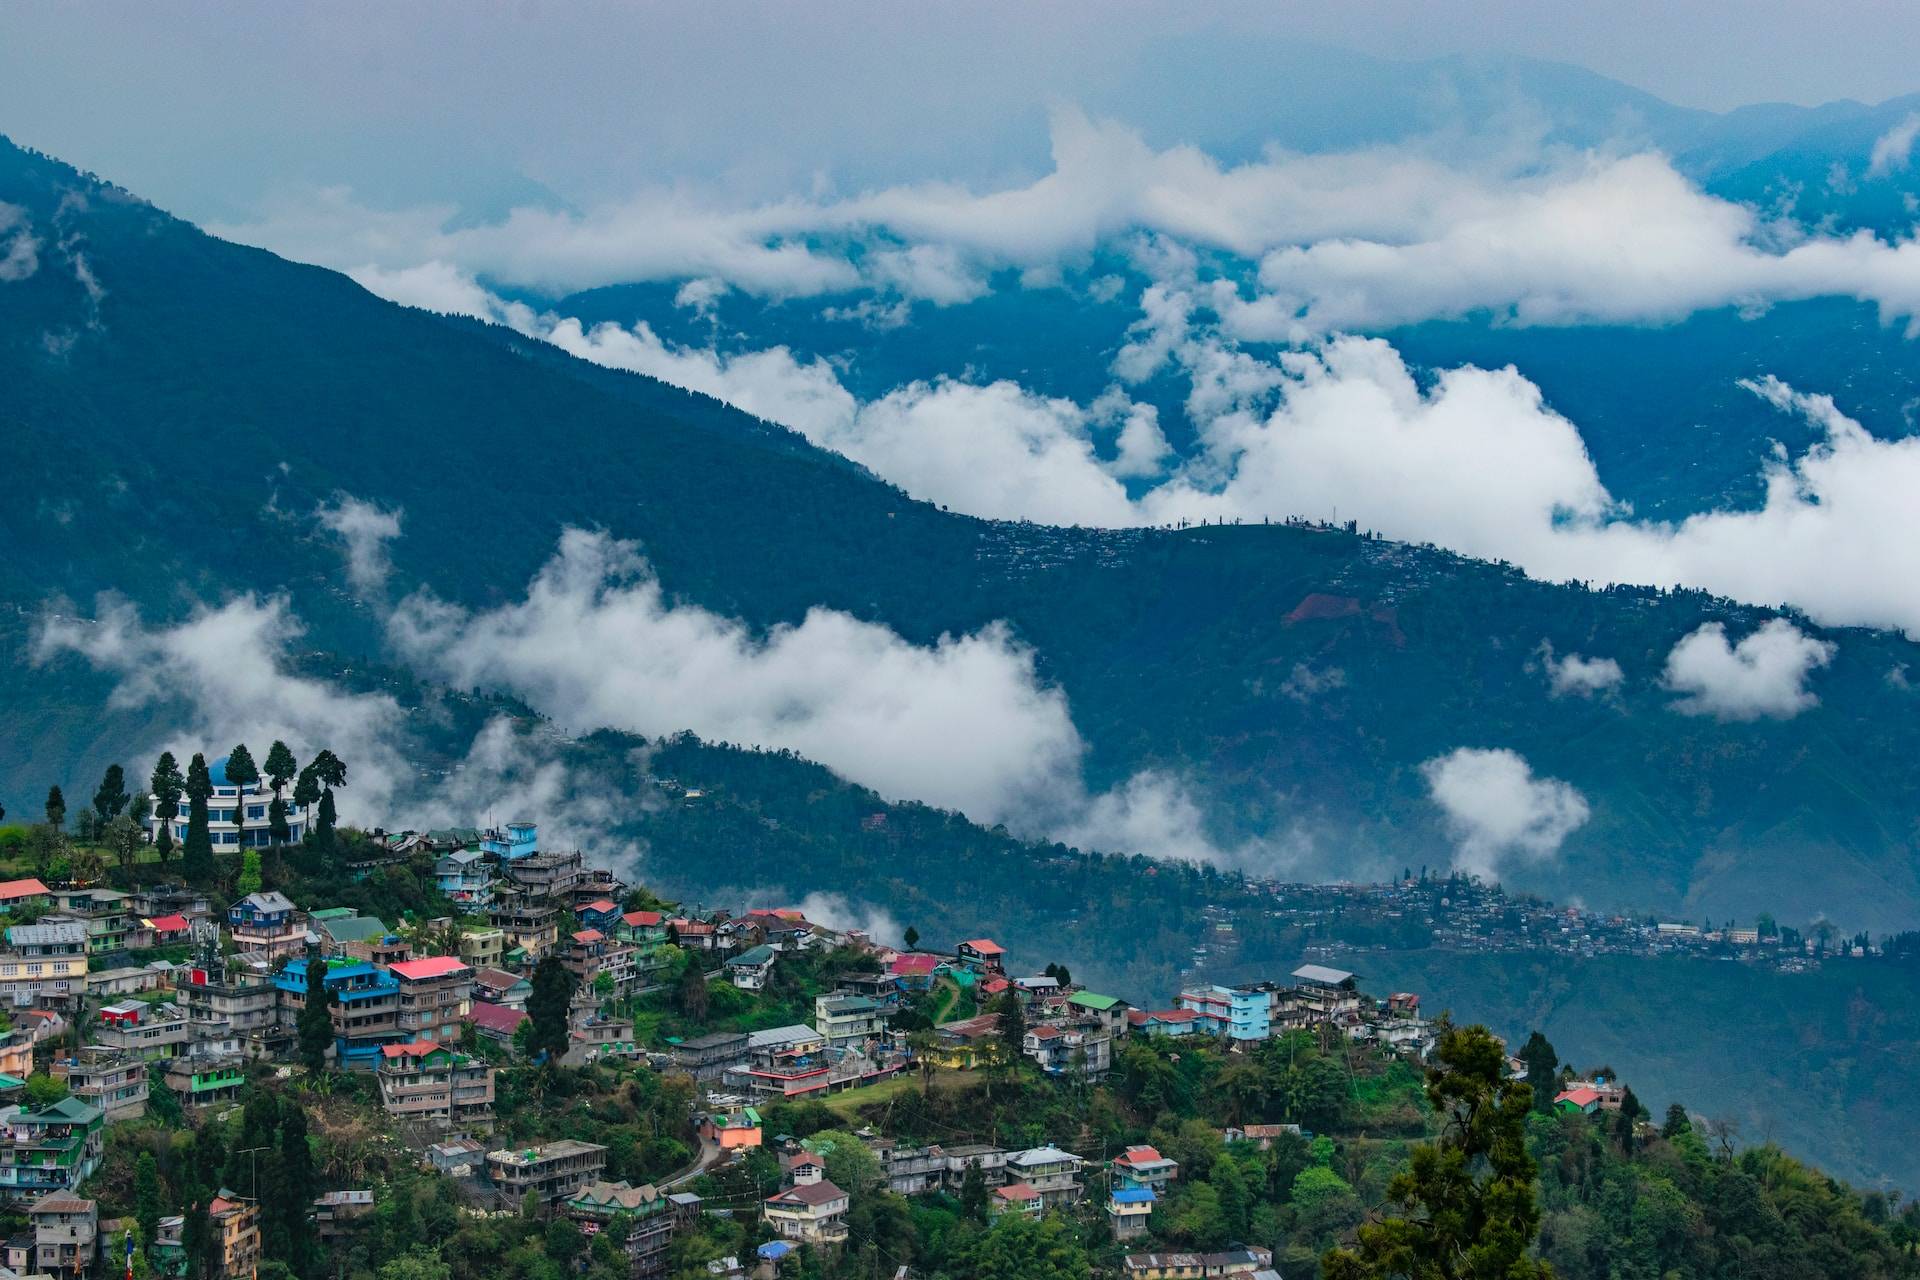 The Most Incredible Hill Stations in India for a Summer Escape